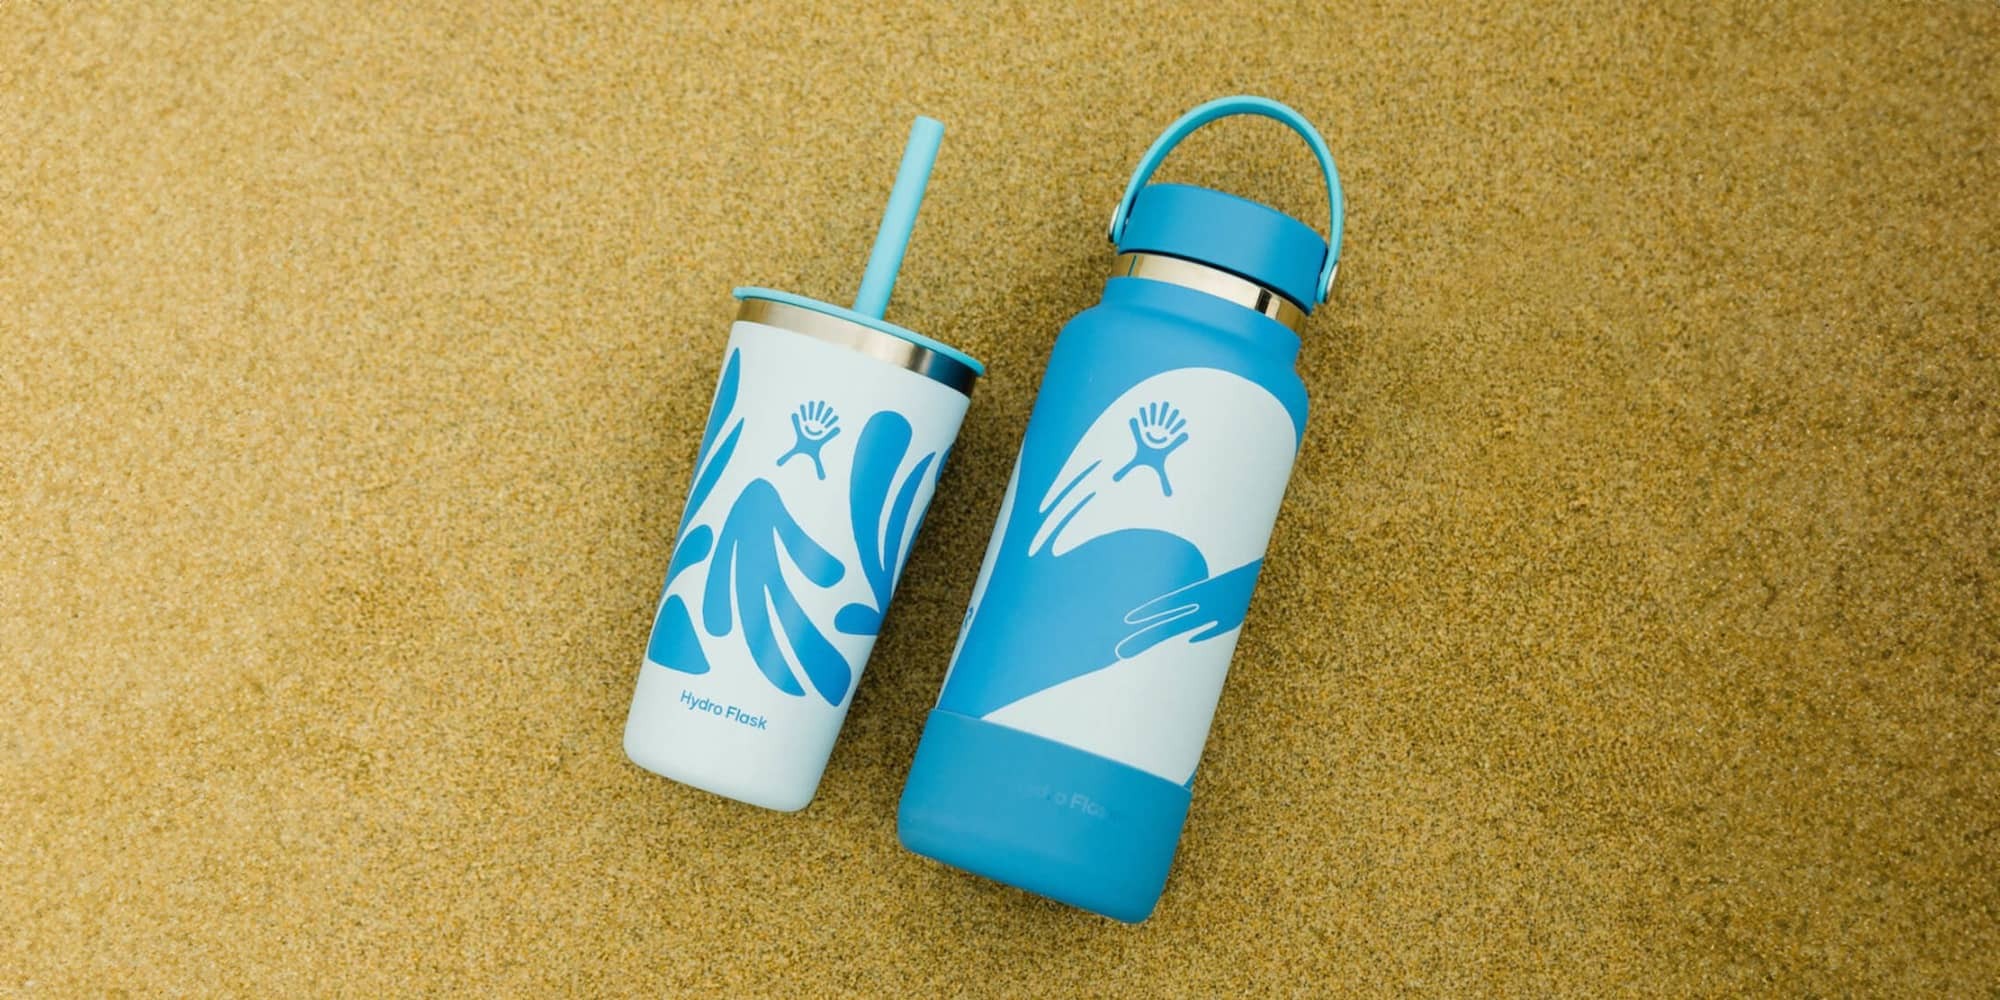 Hydro Flask Flash Sale - Save on Tumblers, Water Bottles, & More!